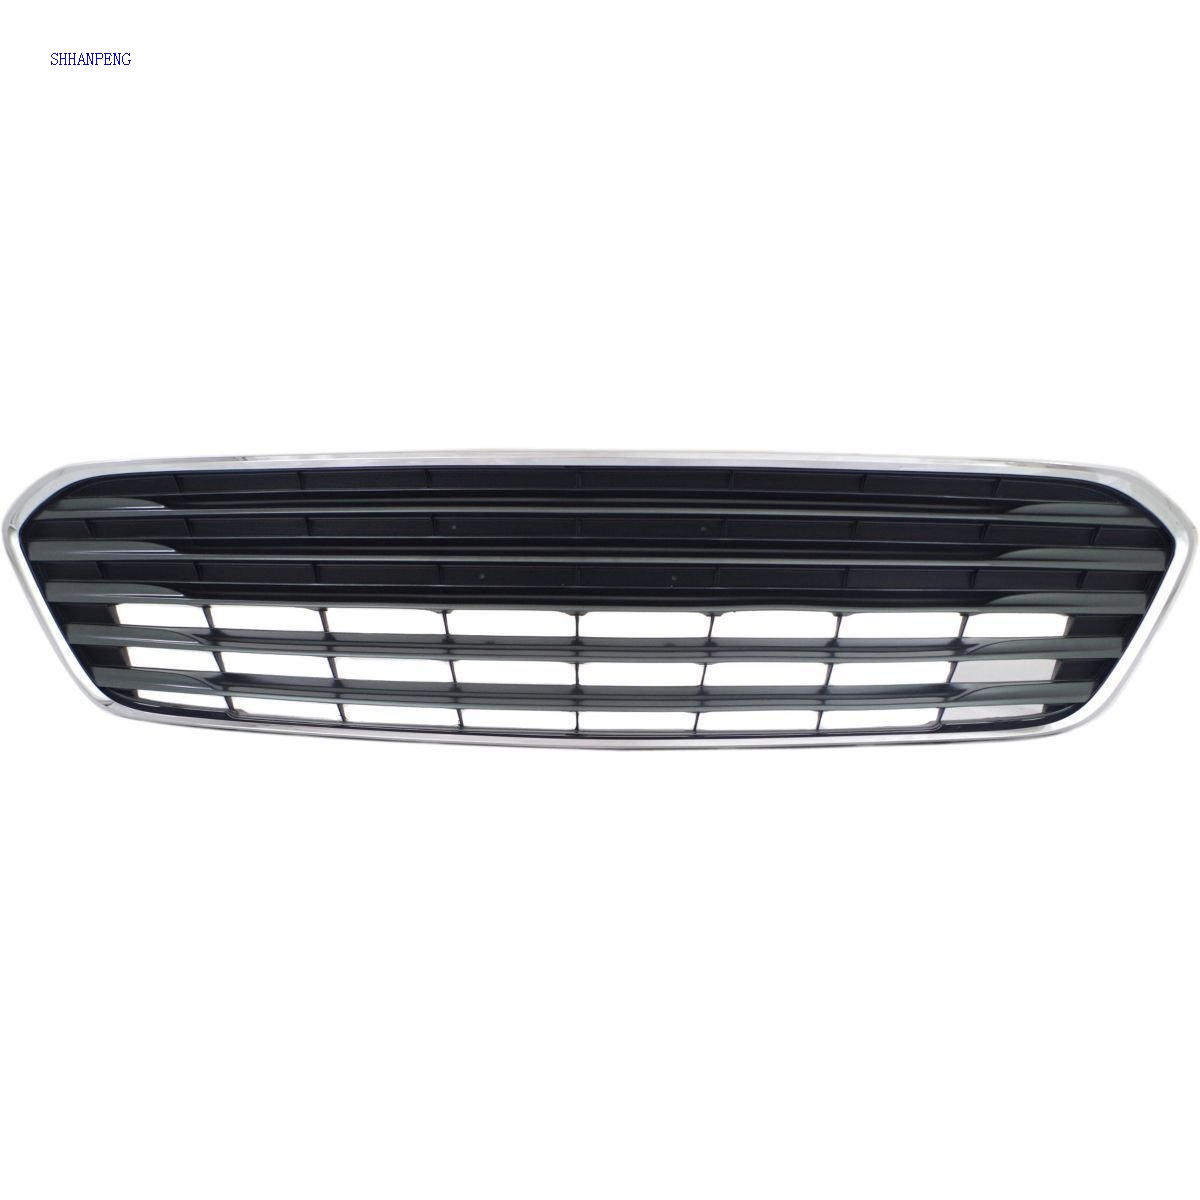 Grille Grill Bumper Assembly CHROME With SILVER Insert For Toyota Avalon TO1036146